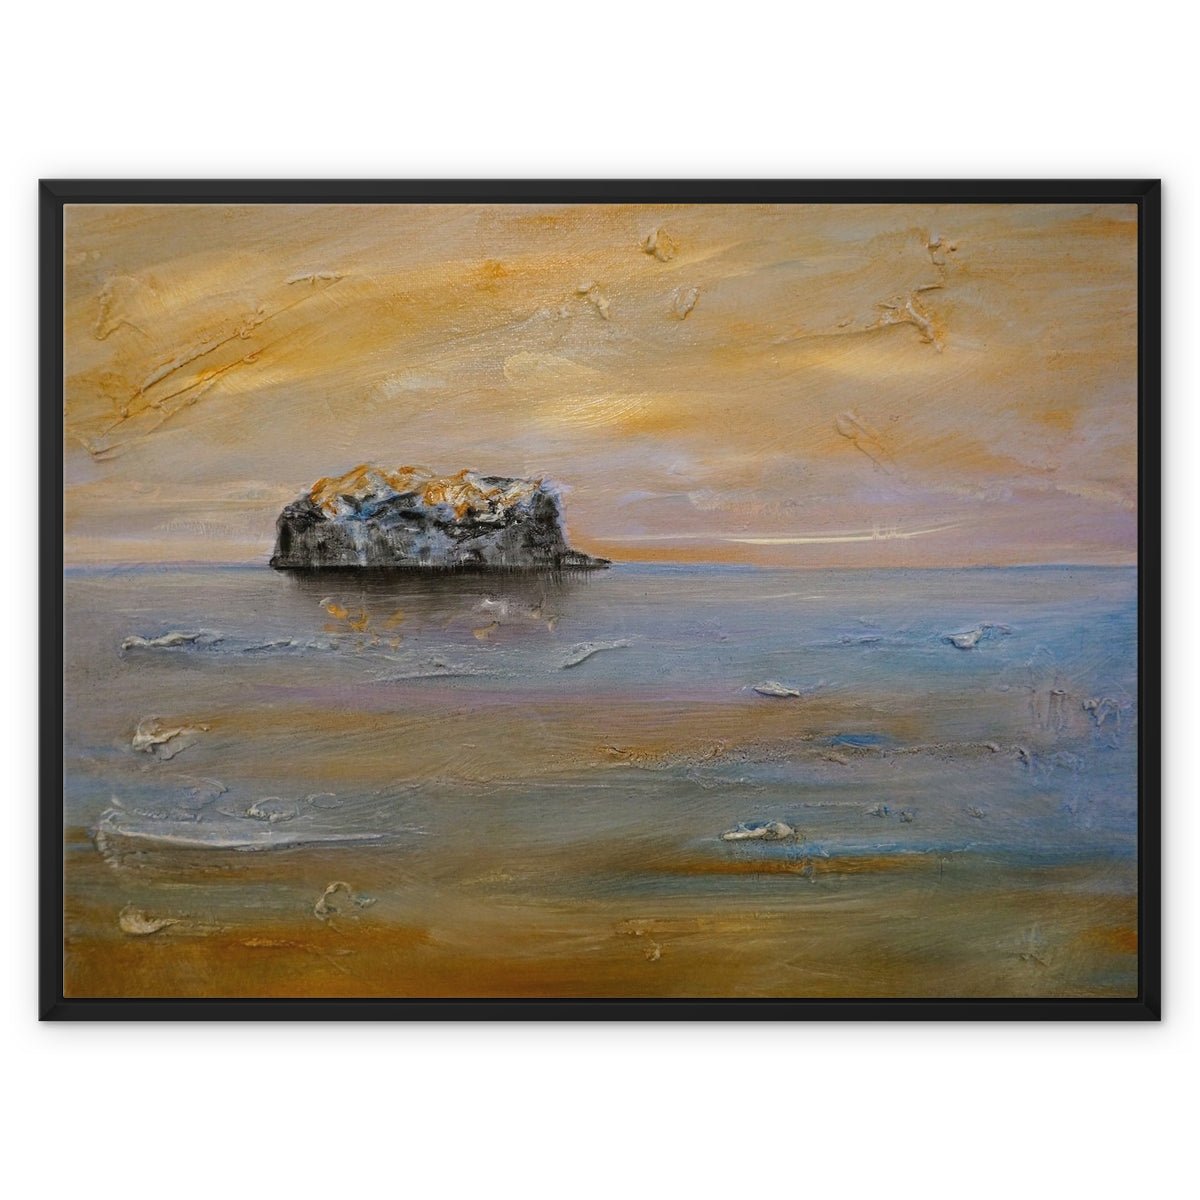 Bass Rock Dawn Painting | Framed Canvas From Scotland-Floating Framed Canvas Prints-Edinburgh & Glasgow Art Gallery-32"x24"-Black Frame-Paintings, Prints, Homeware, Art Gifts From Scotland By Scottish Artist Kevin Hunter